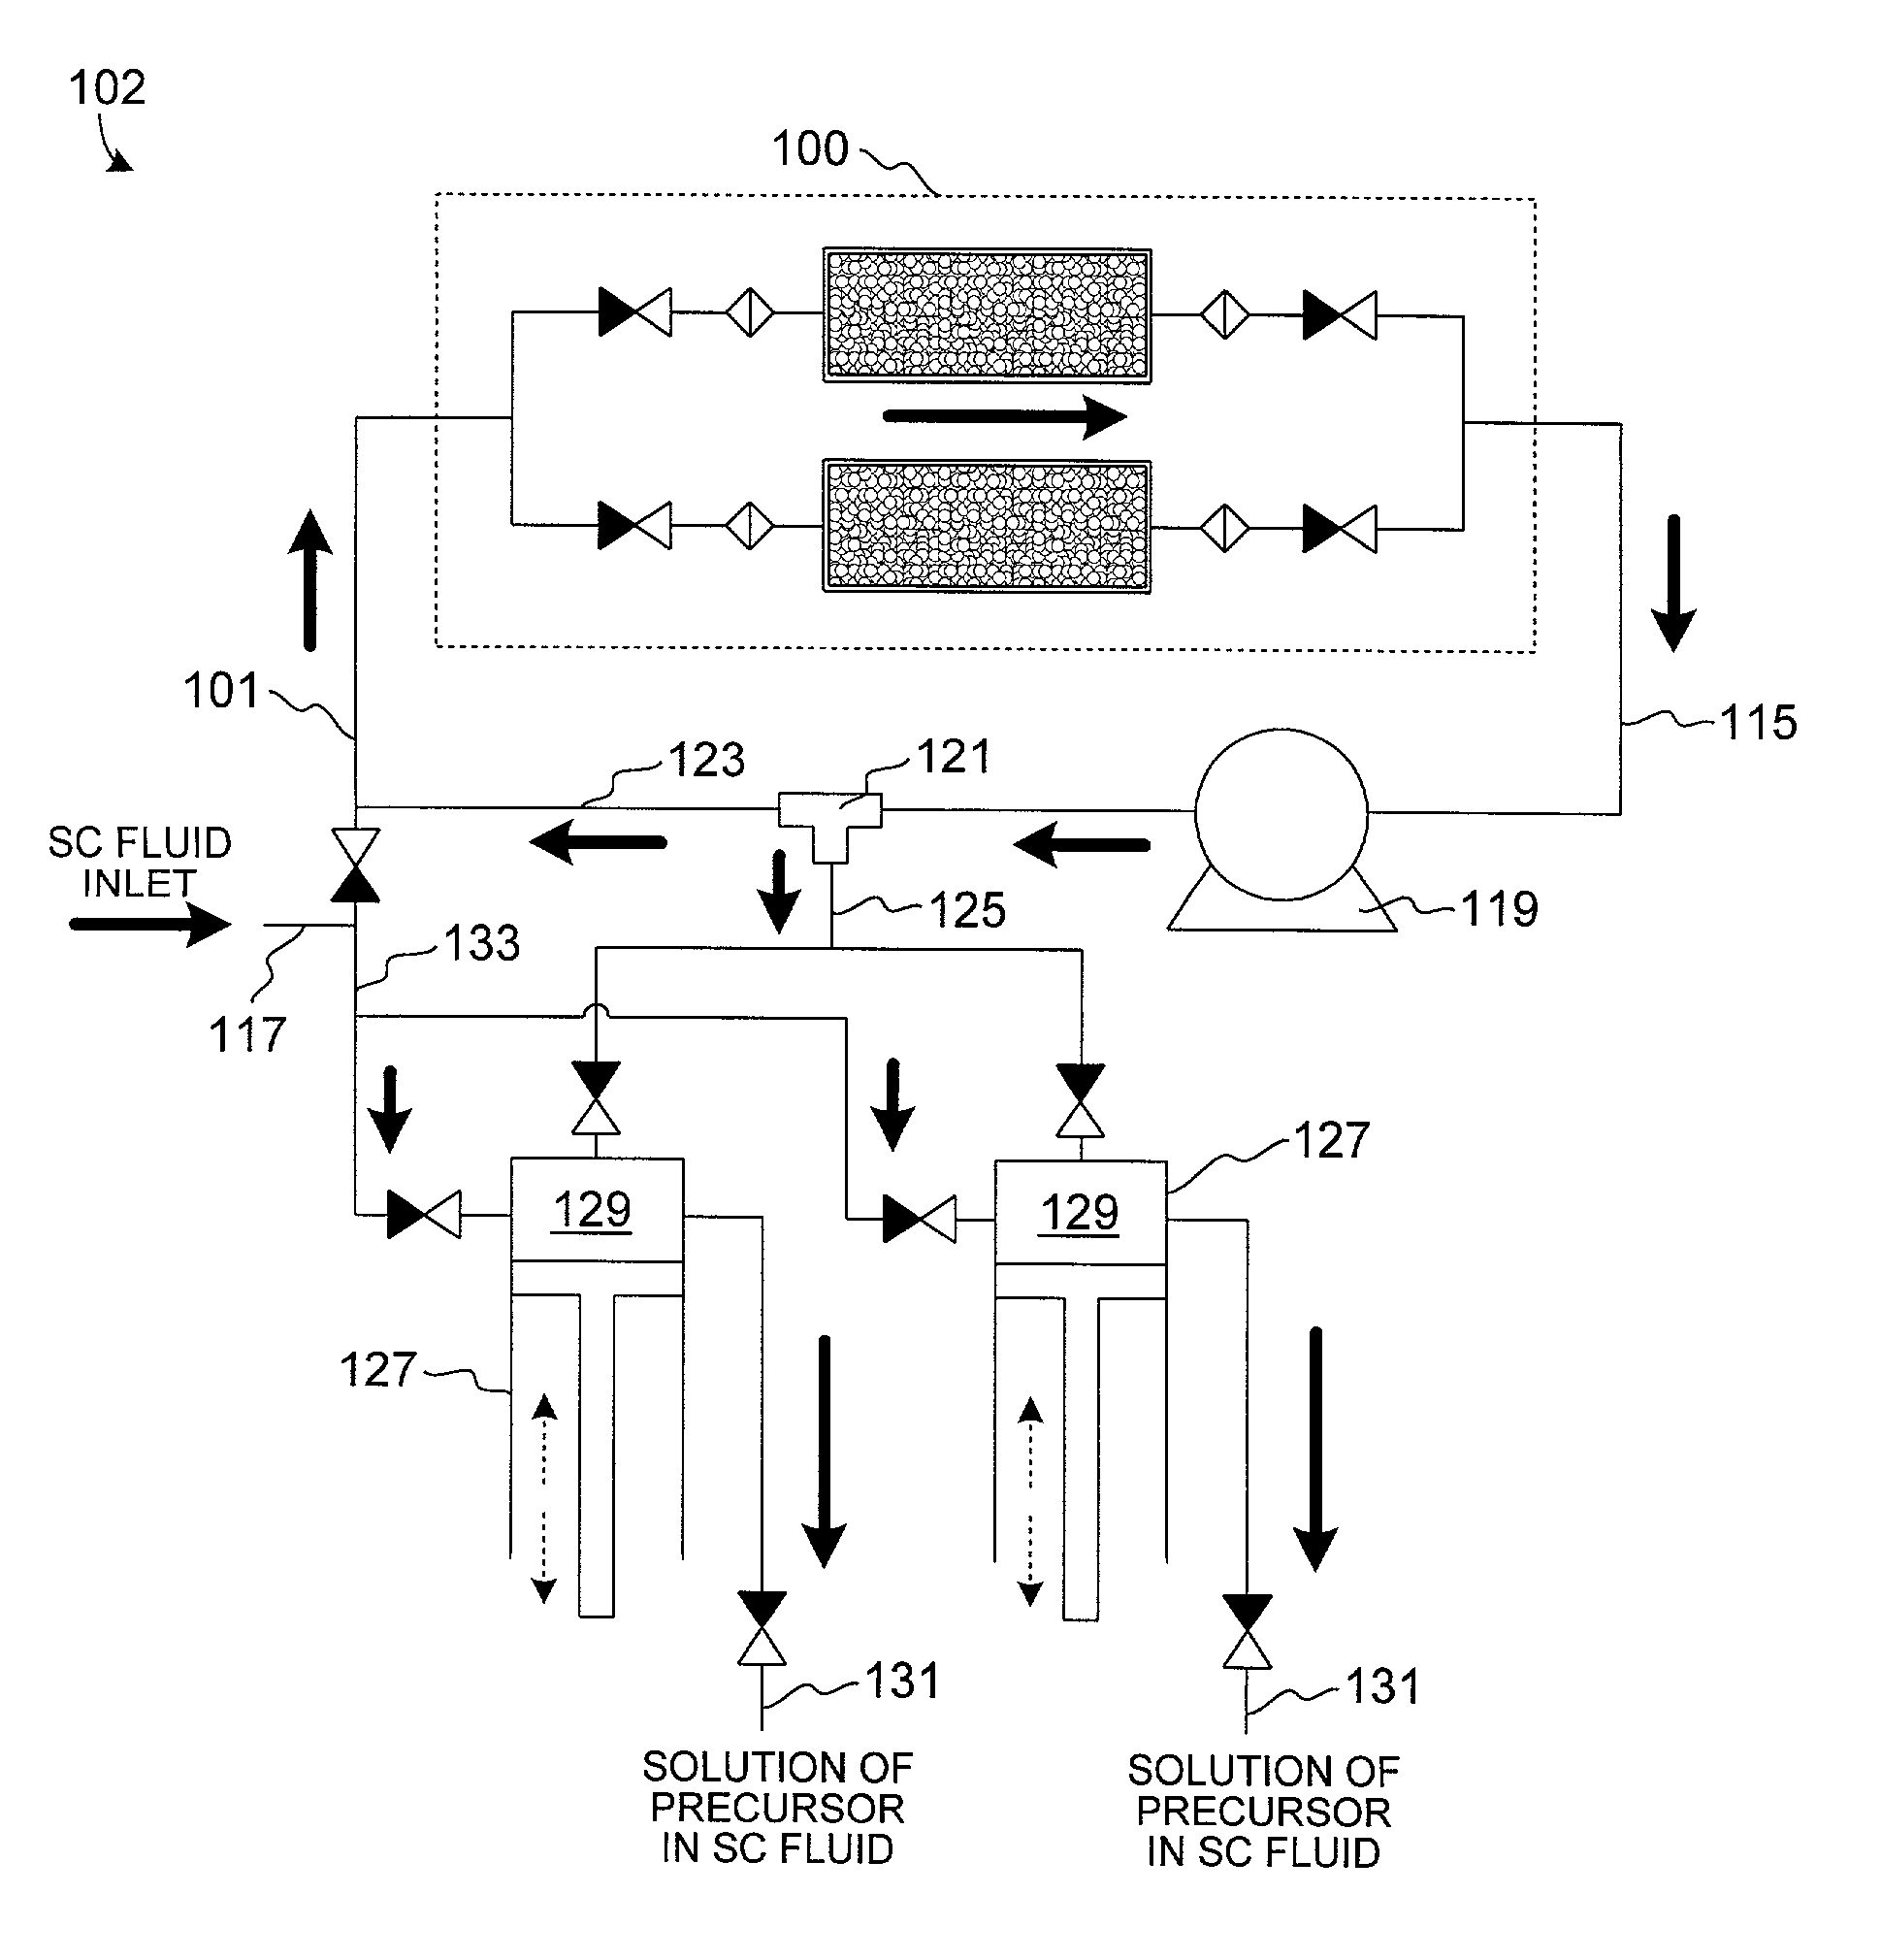 Method and apparatus for introduction of solid precursors and reactants into a supercritical fluid reactor